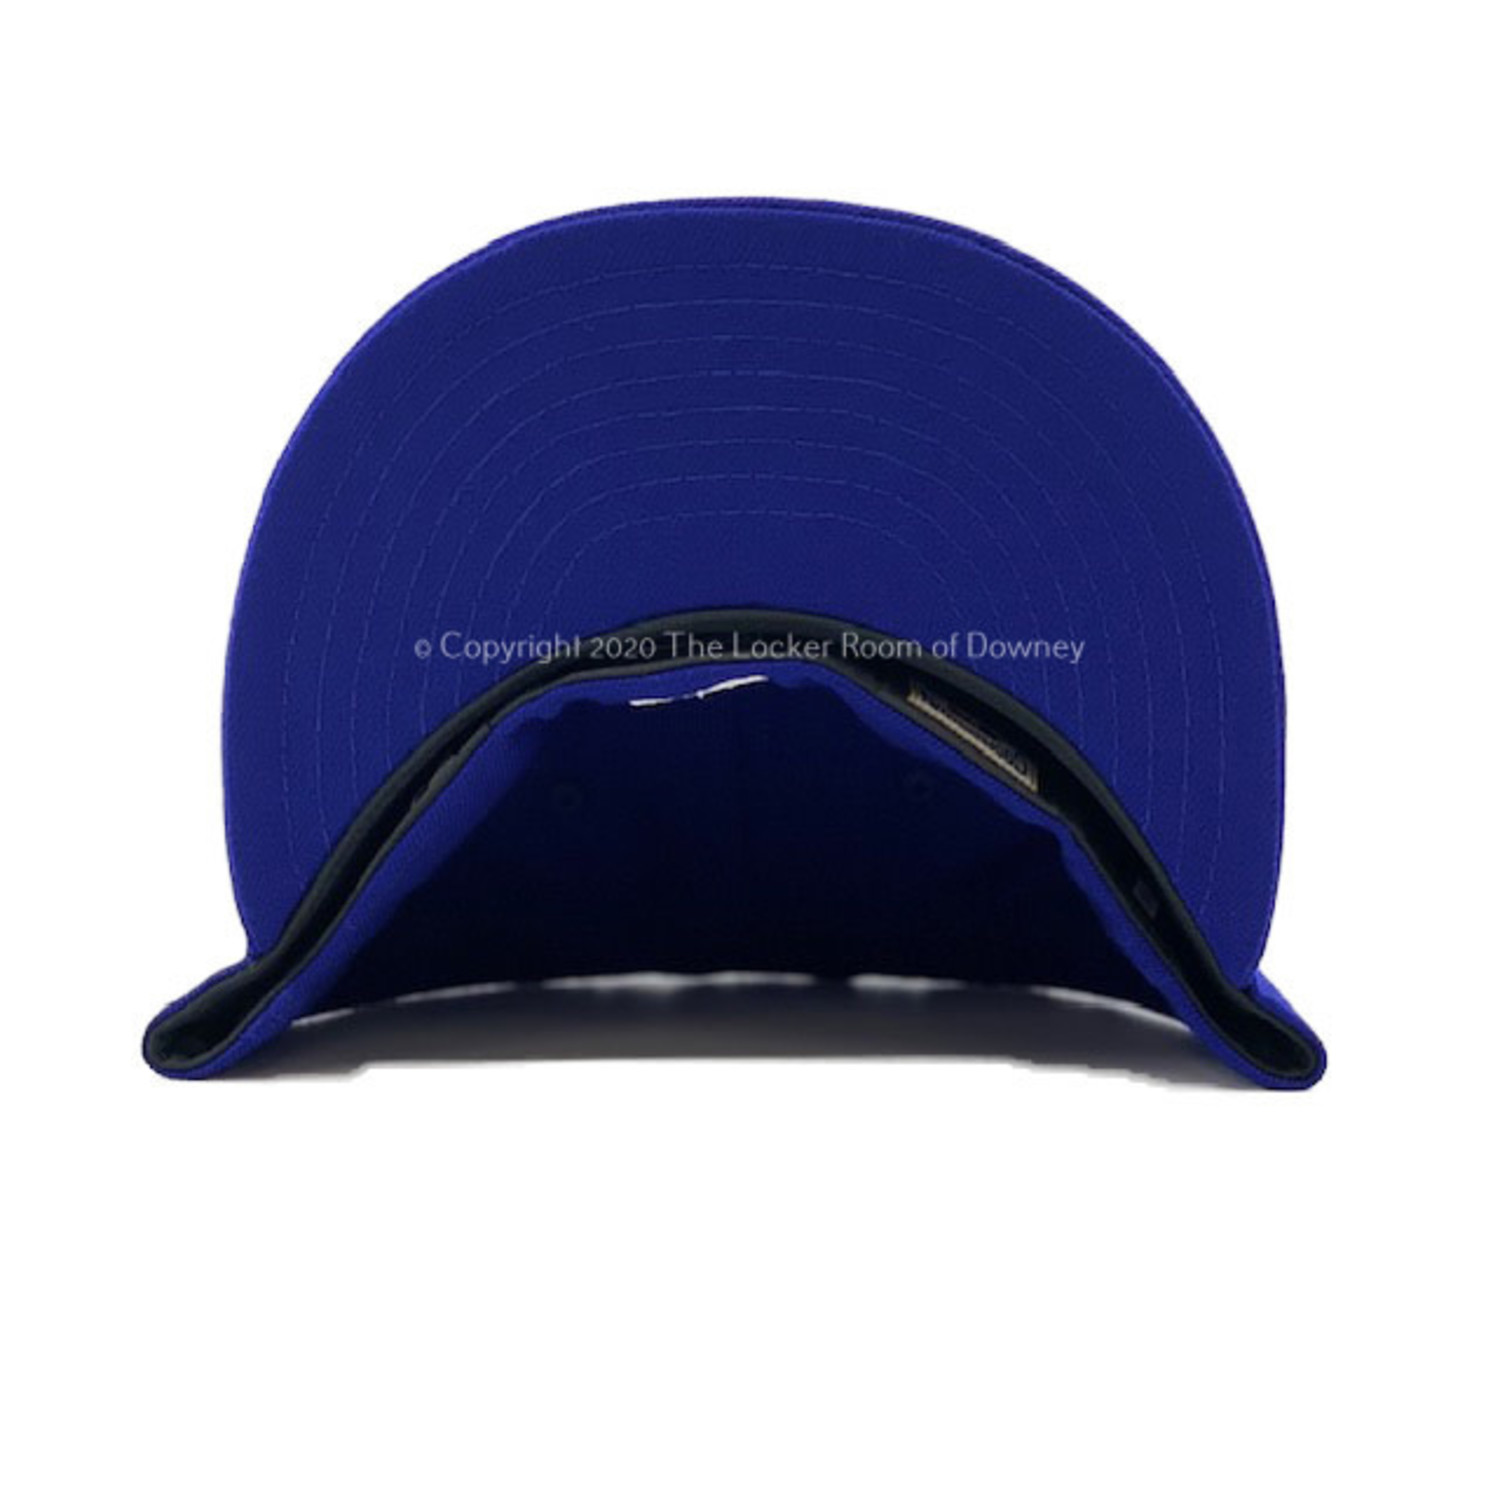 MLB Store - Umpire Caps 🧢 Make the right call and come